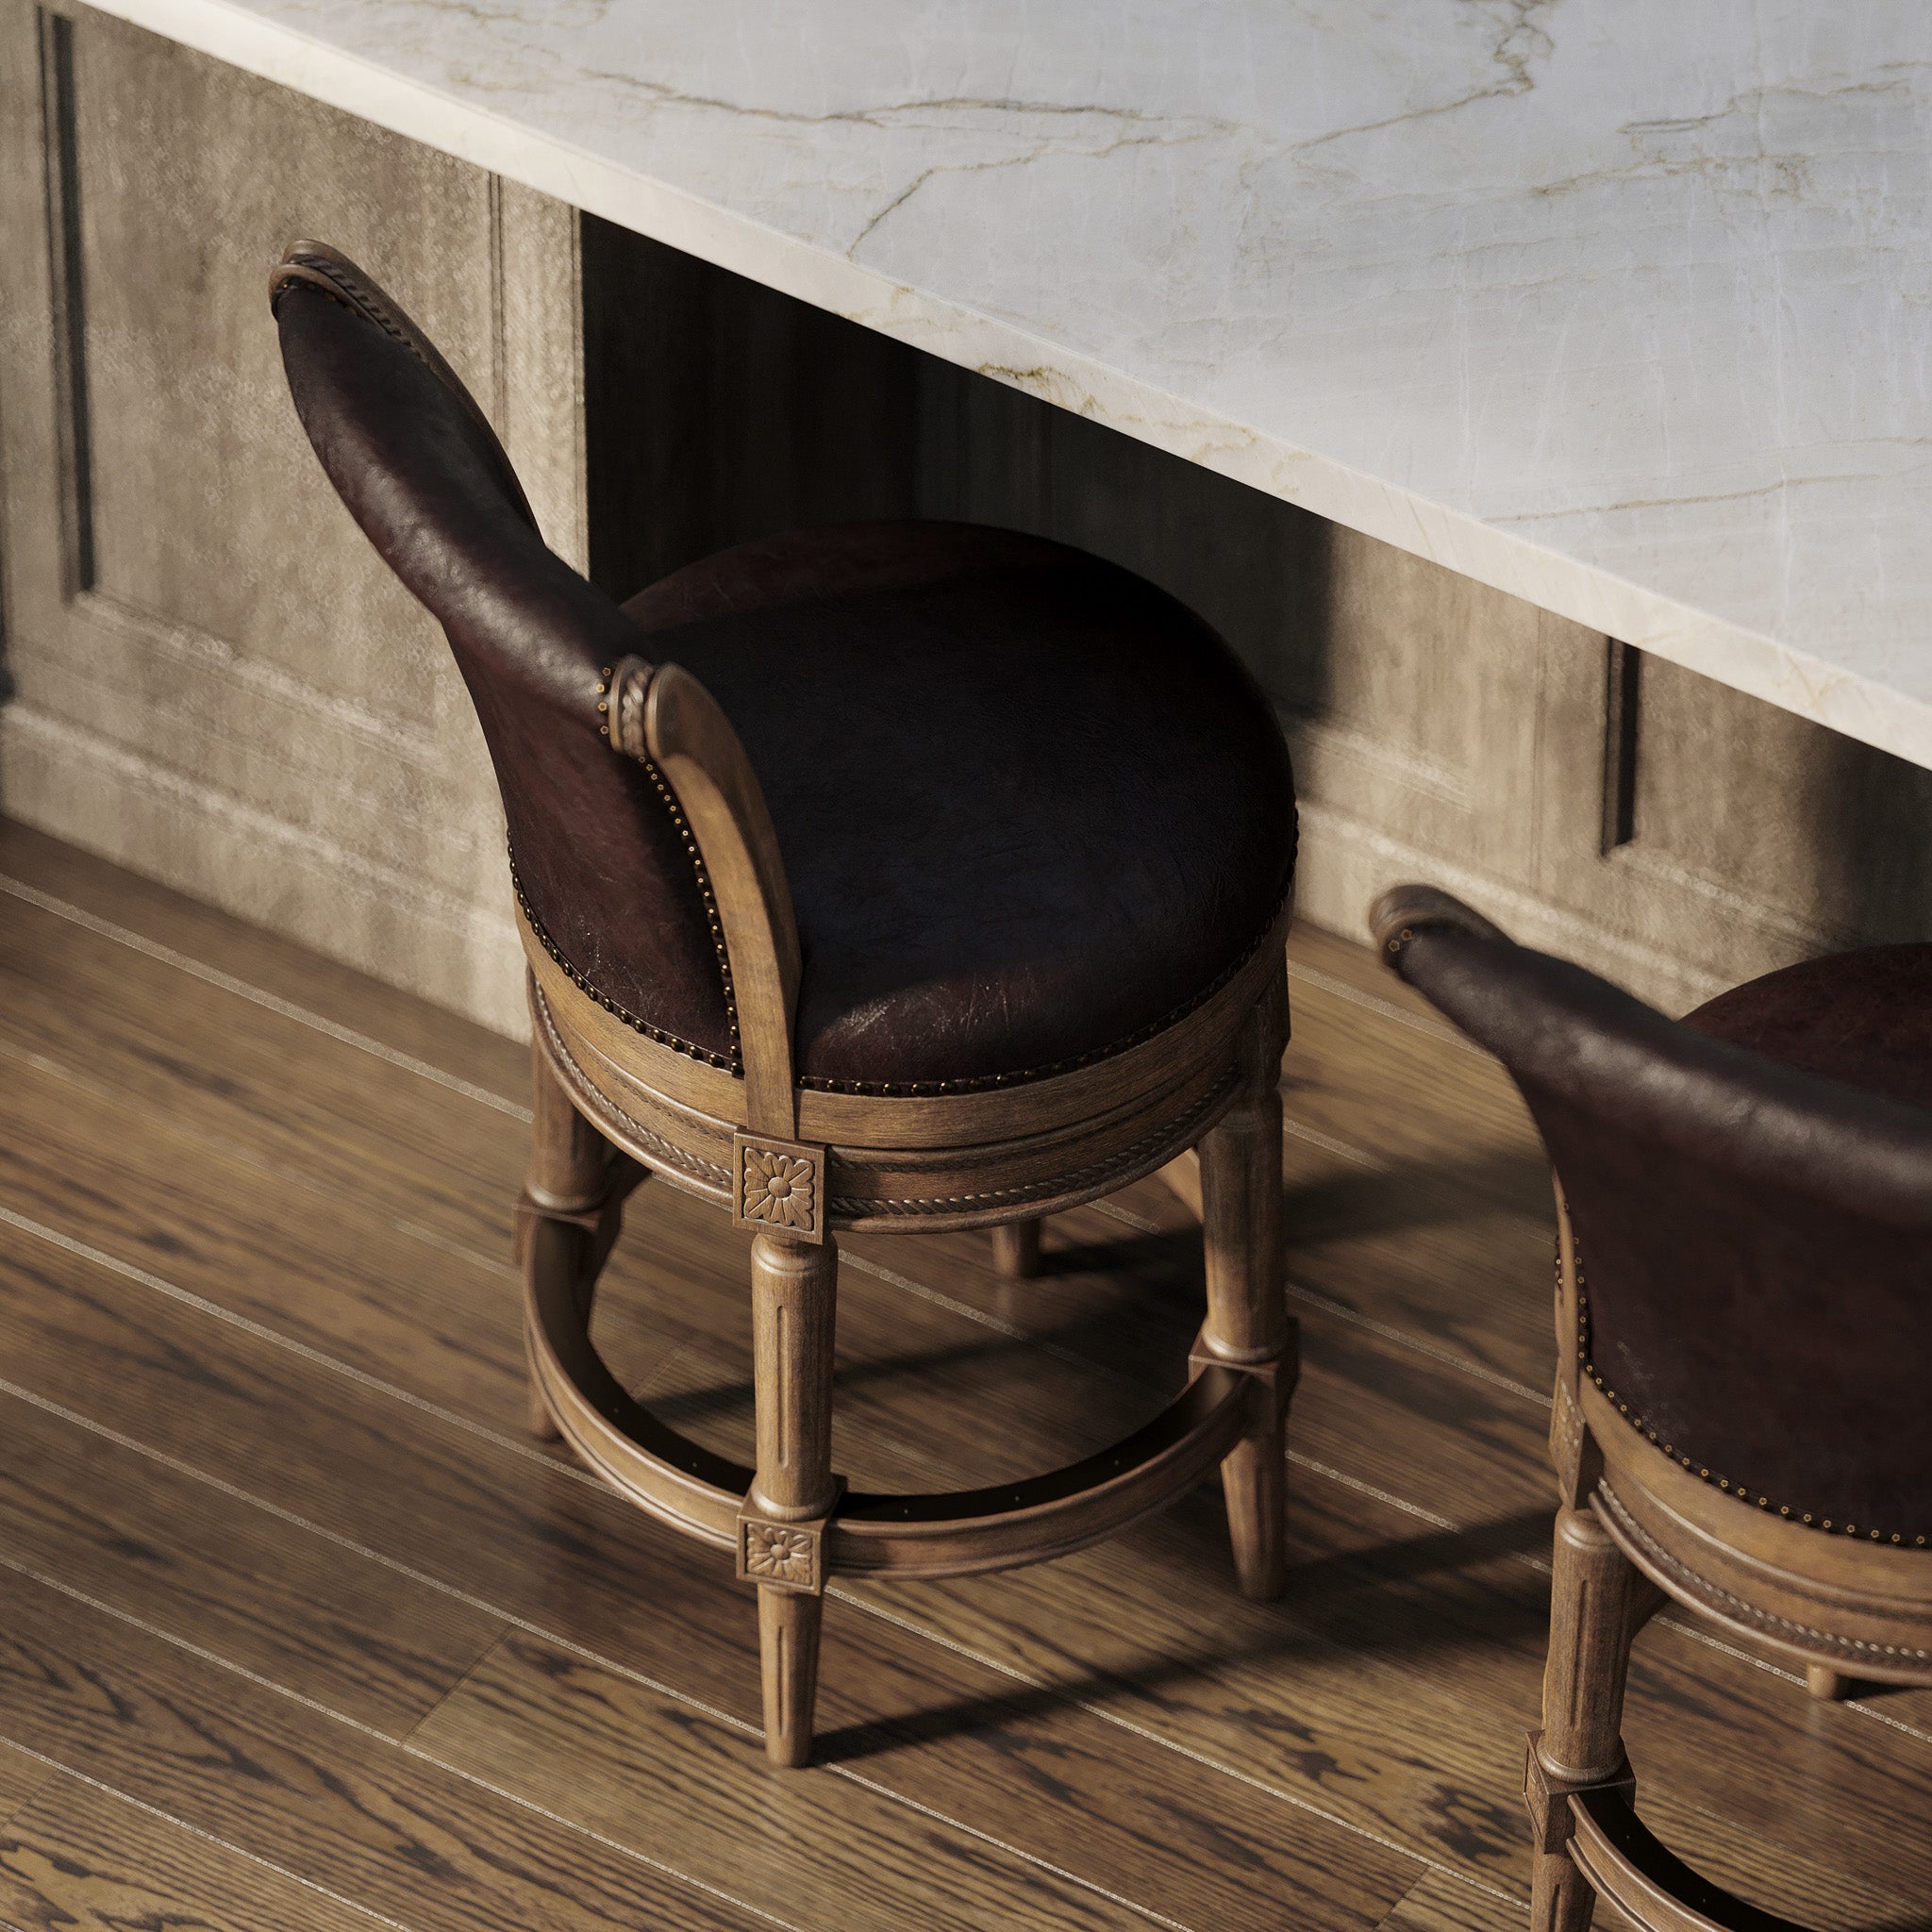 Pullman Counter Stool in Walnut Finish with Marksman Saddle Vegan Leather in Stools by Maven Lane